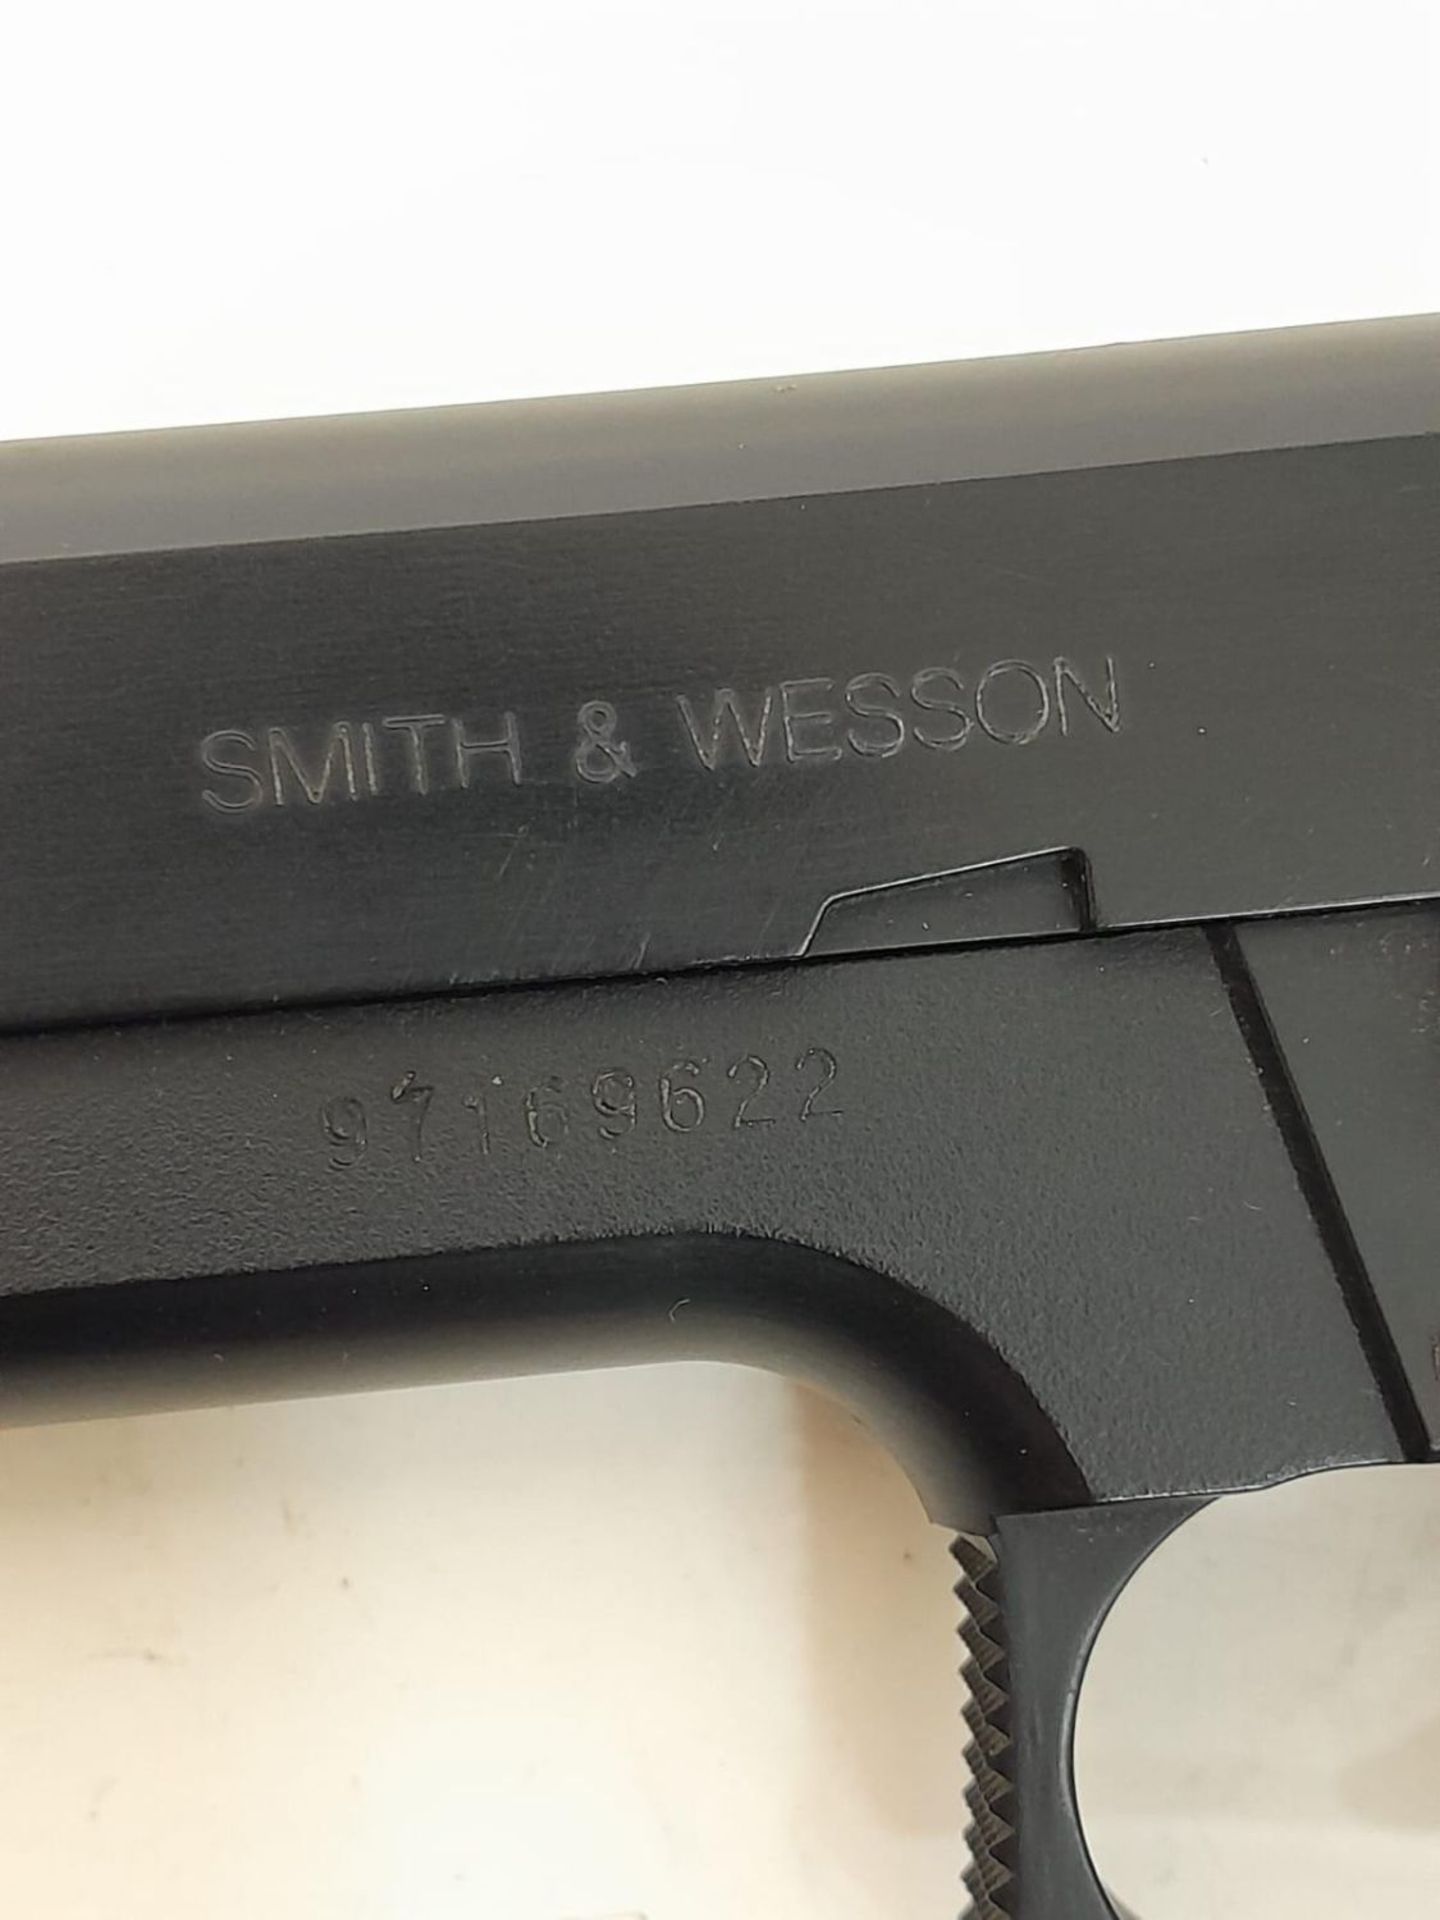 A Smith and Wesson Soft Air 6mm BB Air Pistol. Full Working Order. Comes with Anglo Arms Holster. UK - Image 7 of 10